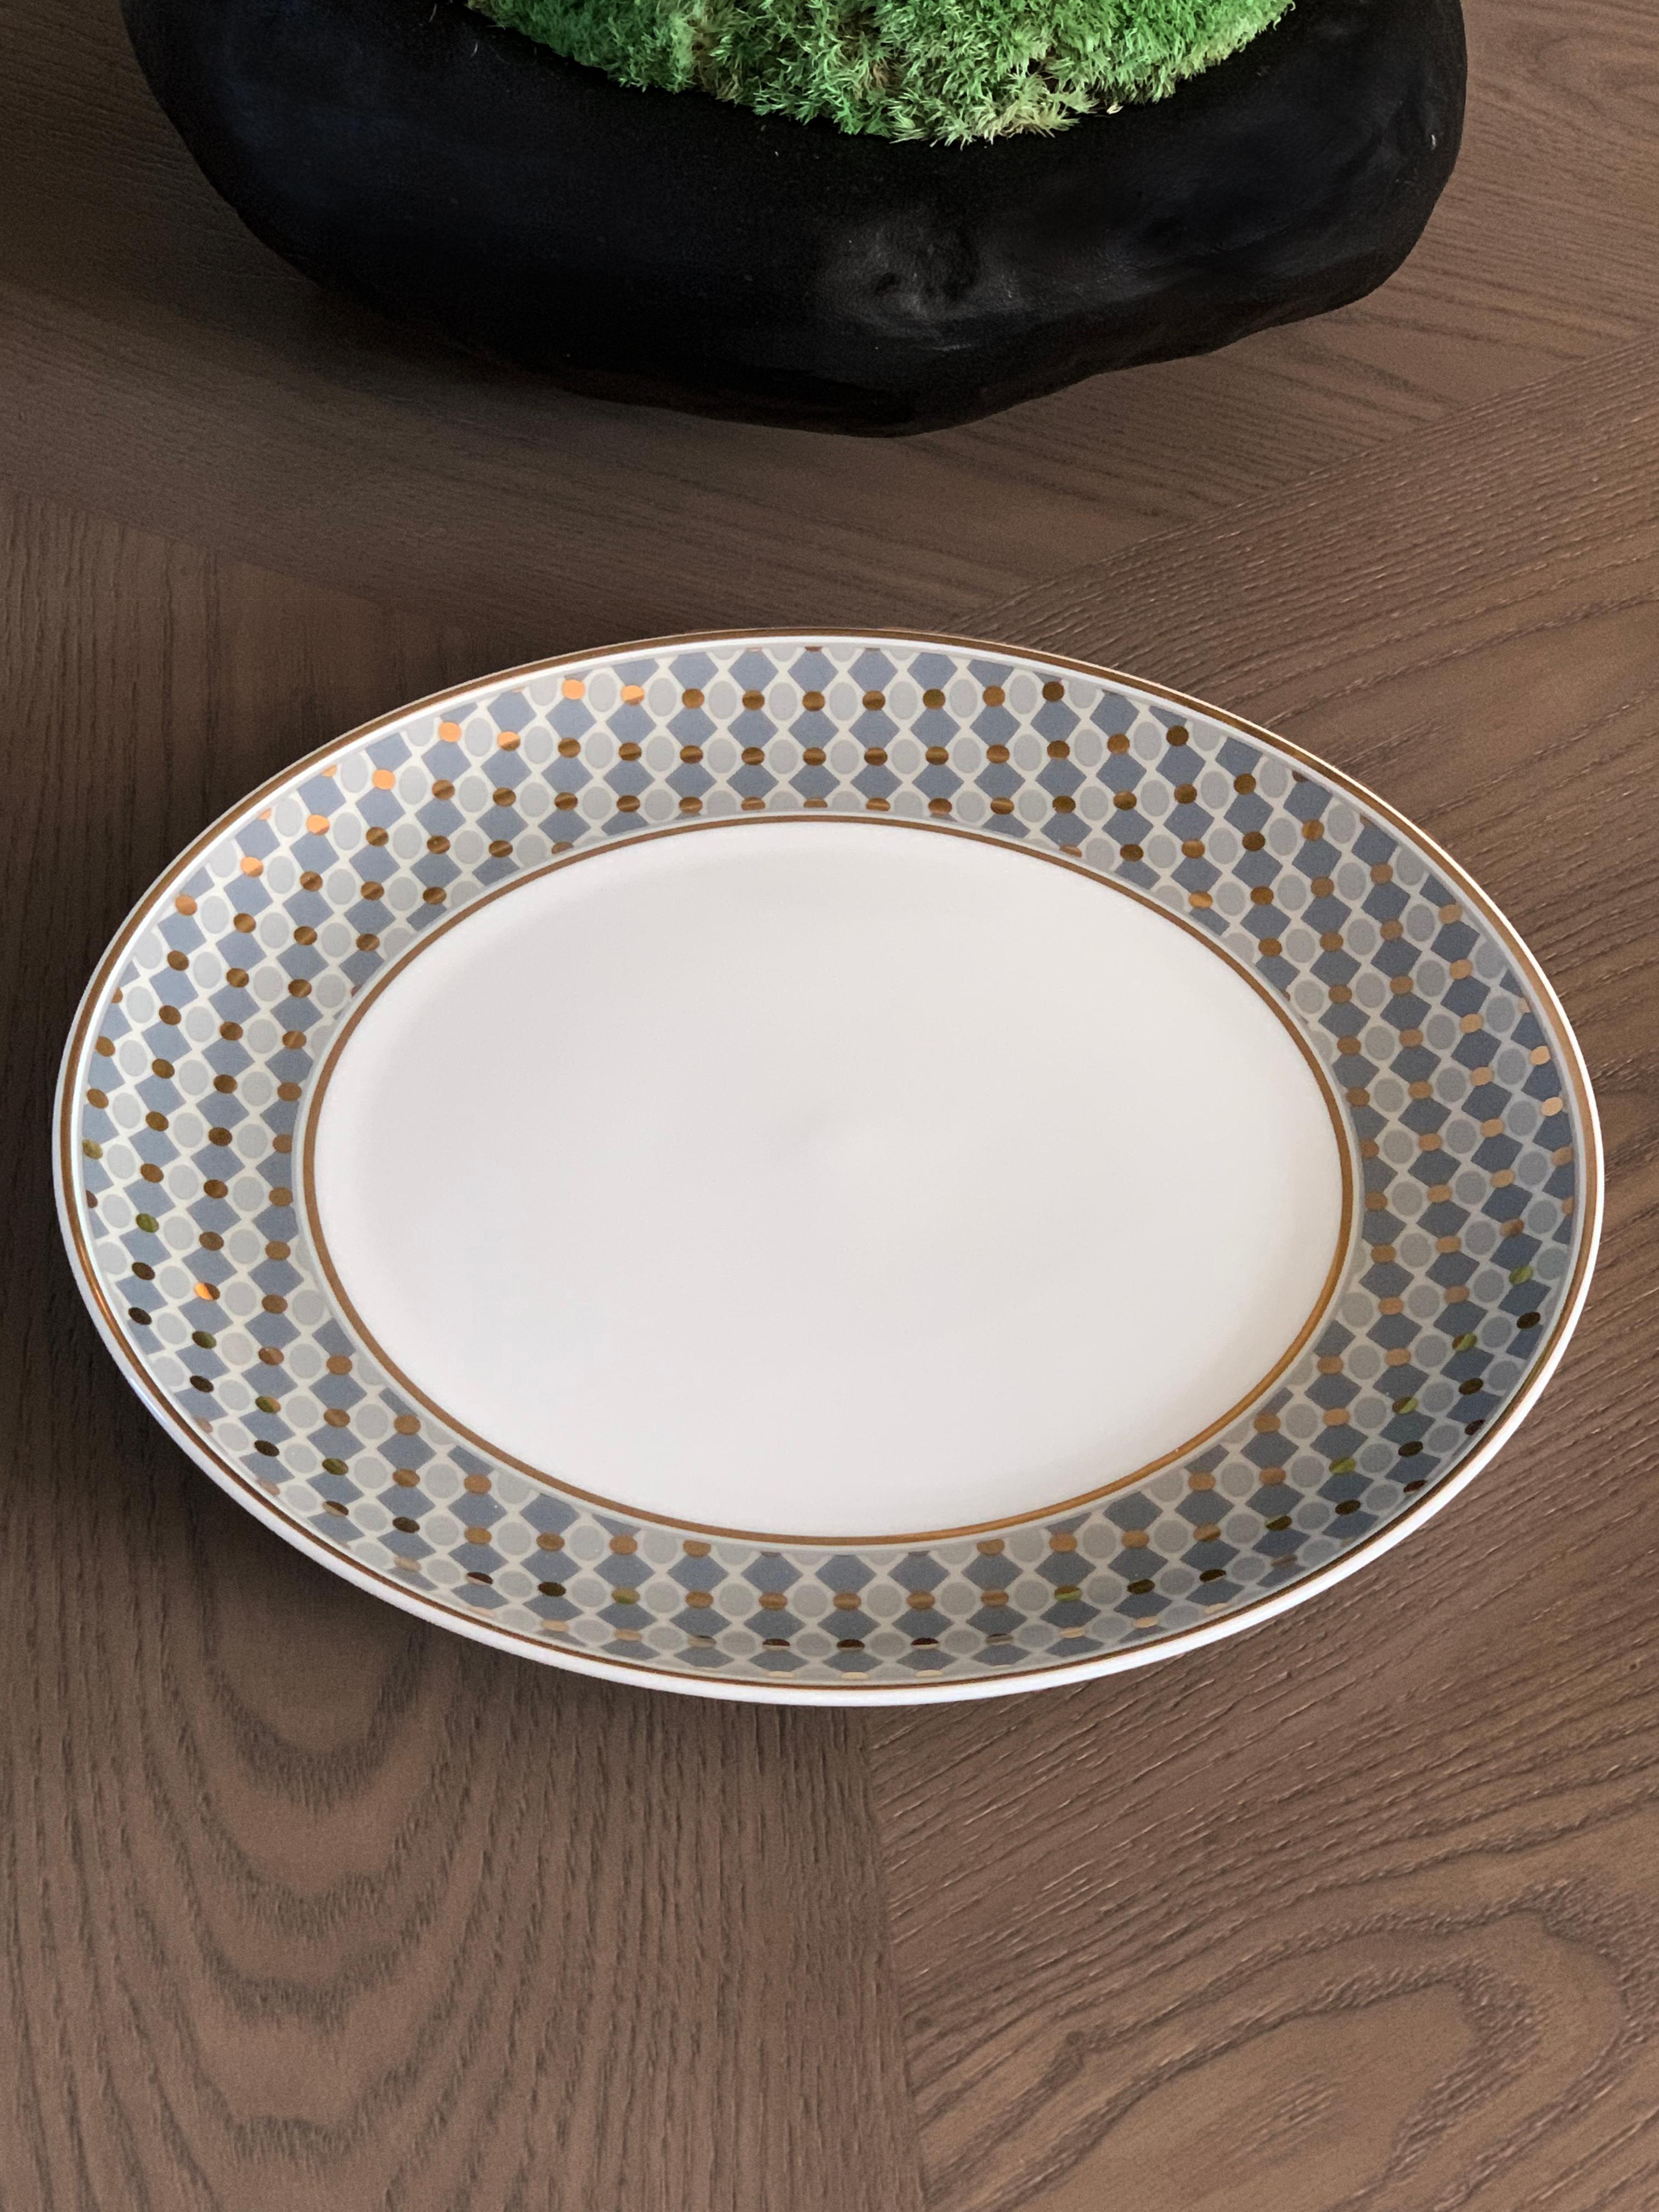 Larger quantities available upon request, with 8 weeks production time.

Description: Dinner plate ring pattern (2 pieces)
Color: Blue and gold
Size: 26.5 Ø x 2.5 H cm
Material: Porcelain and gold
Collection: Modern Vintage